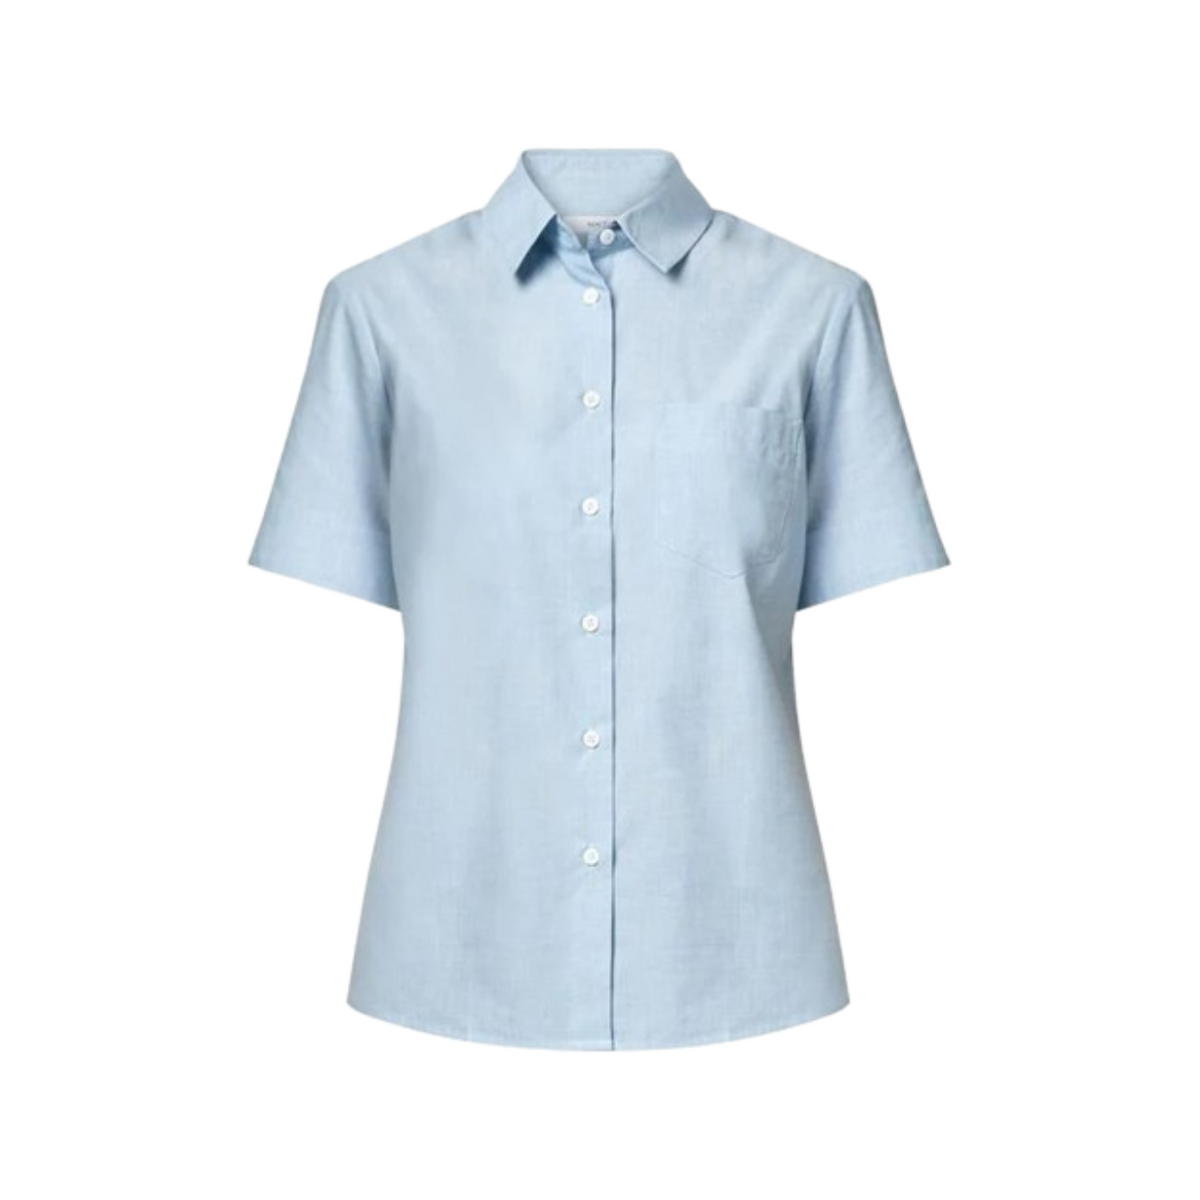 Clearance! NNT Textured S/S Shirt Classic Fit Collared Business Shirt CATUDJ-Collins Clothing Co